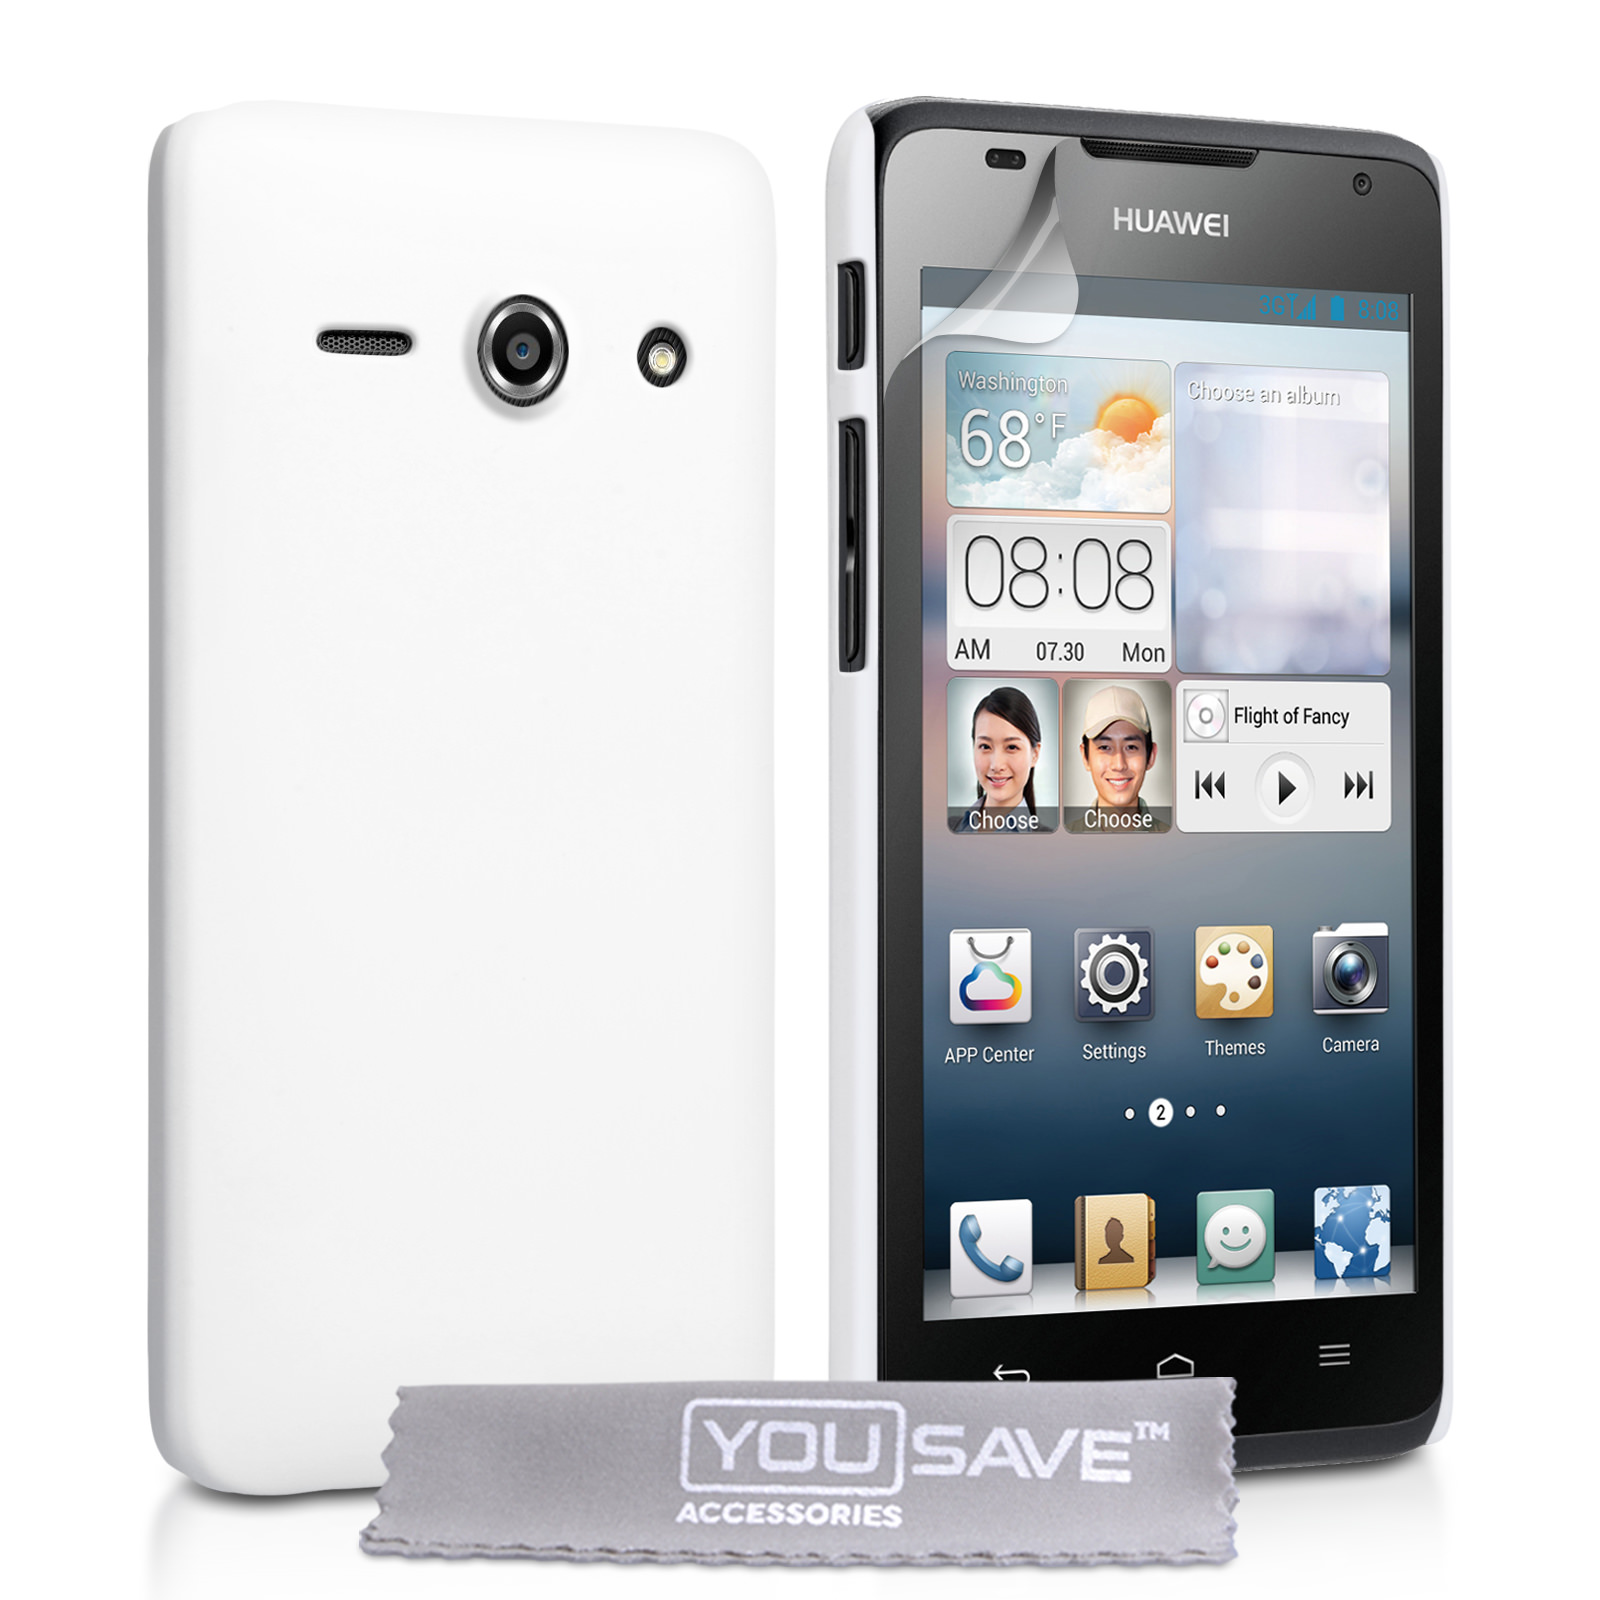 YouSave Accessories Huawei Ascend Y530 Hard Hybrid Case - White